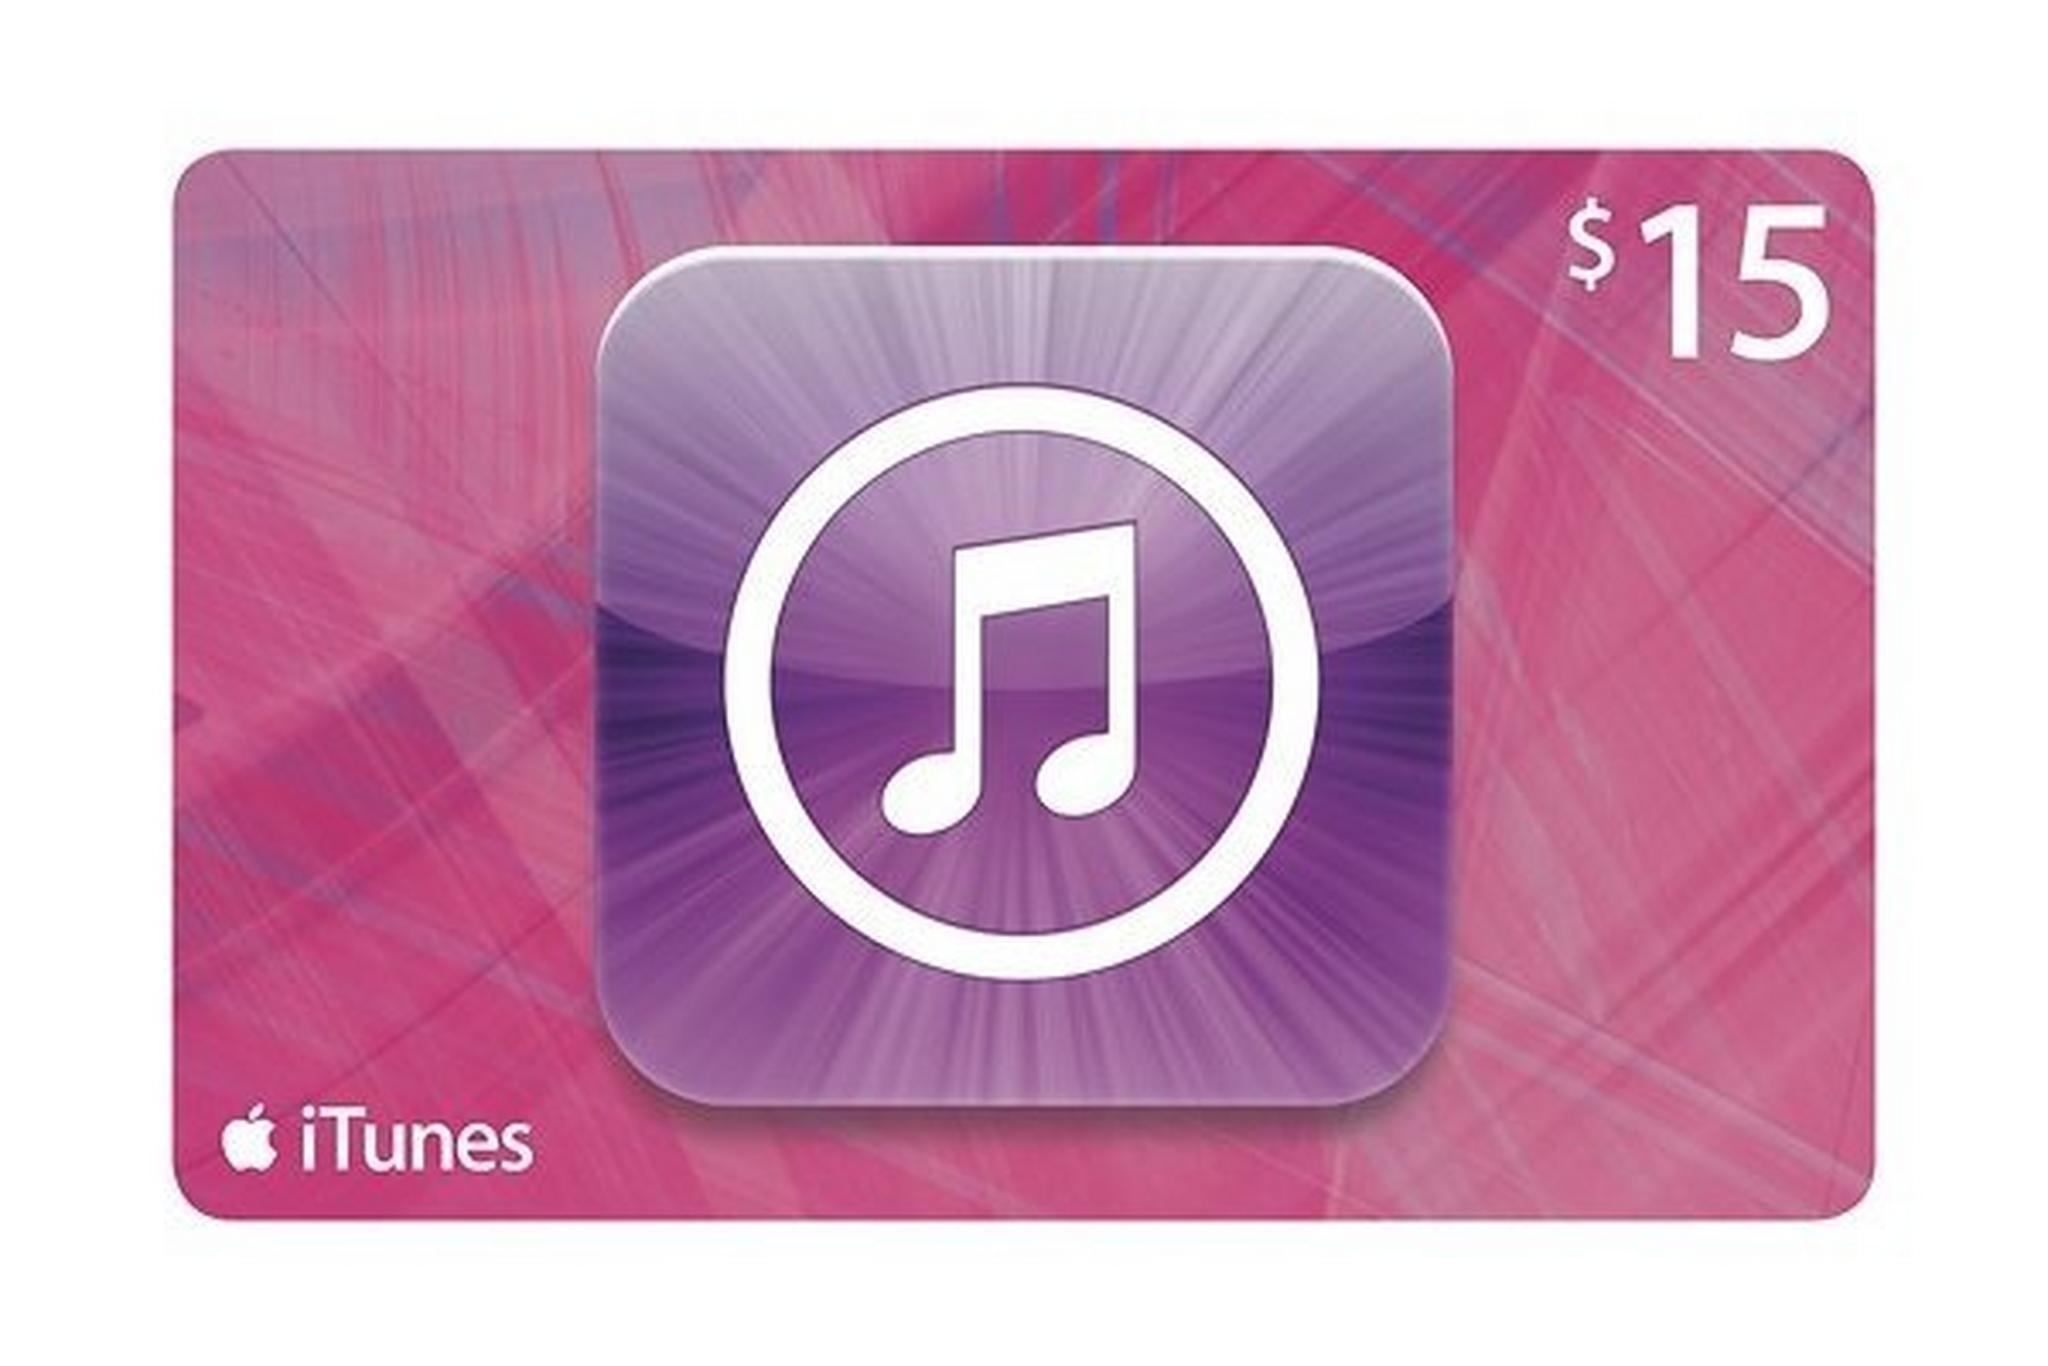 Apple iTunes Gift Card $15 (U.S. Account) - Instant Email Delivery